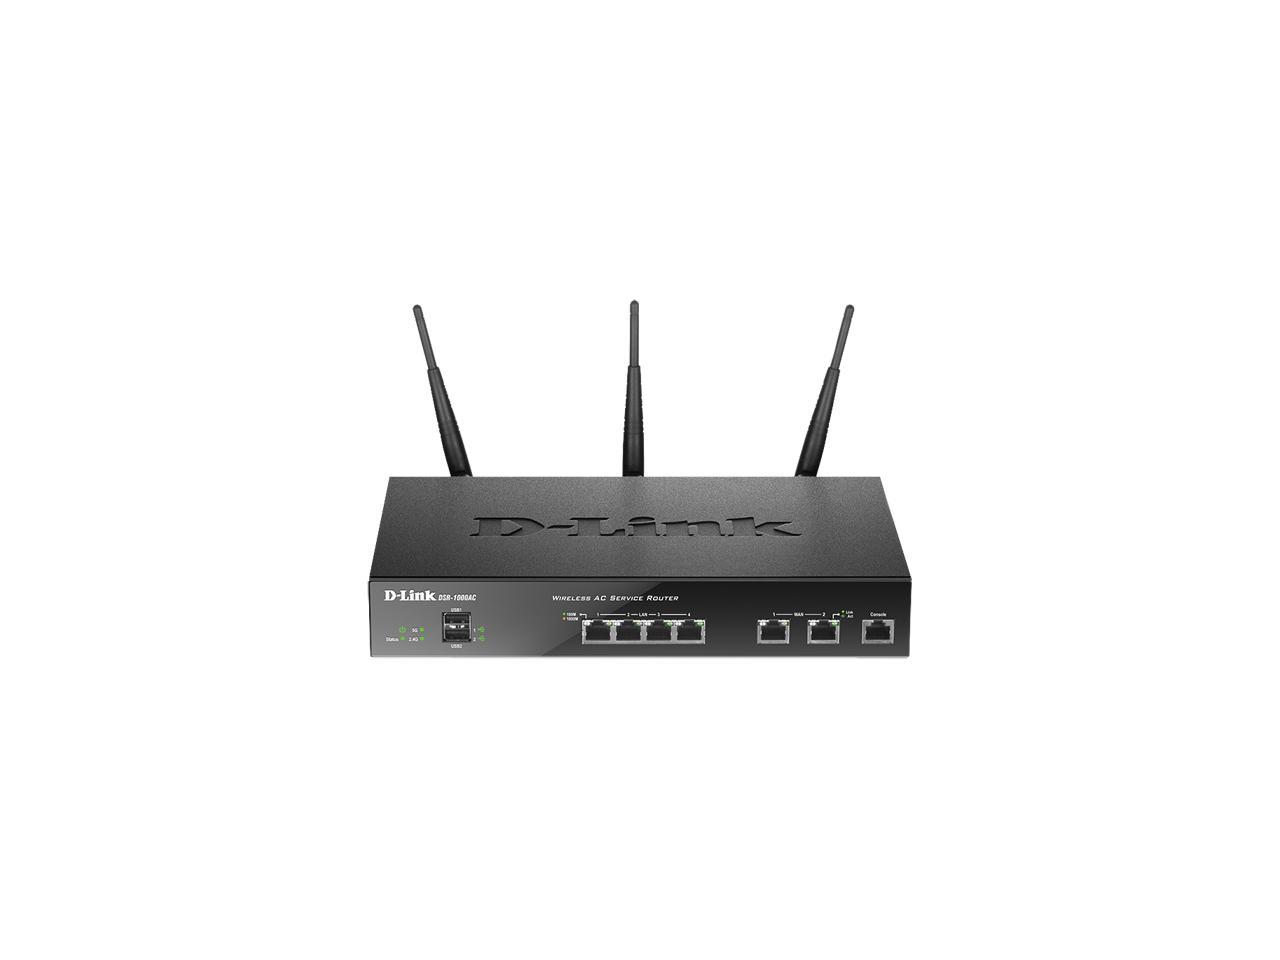 D-Link DSR-1000AC Wireless AC Unified Services VPN Router IEEE 802.11ac, IEEE 802.11a/b/g/n